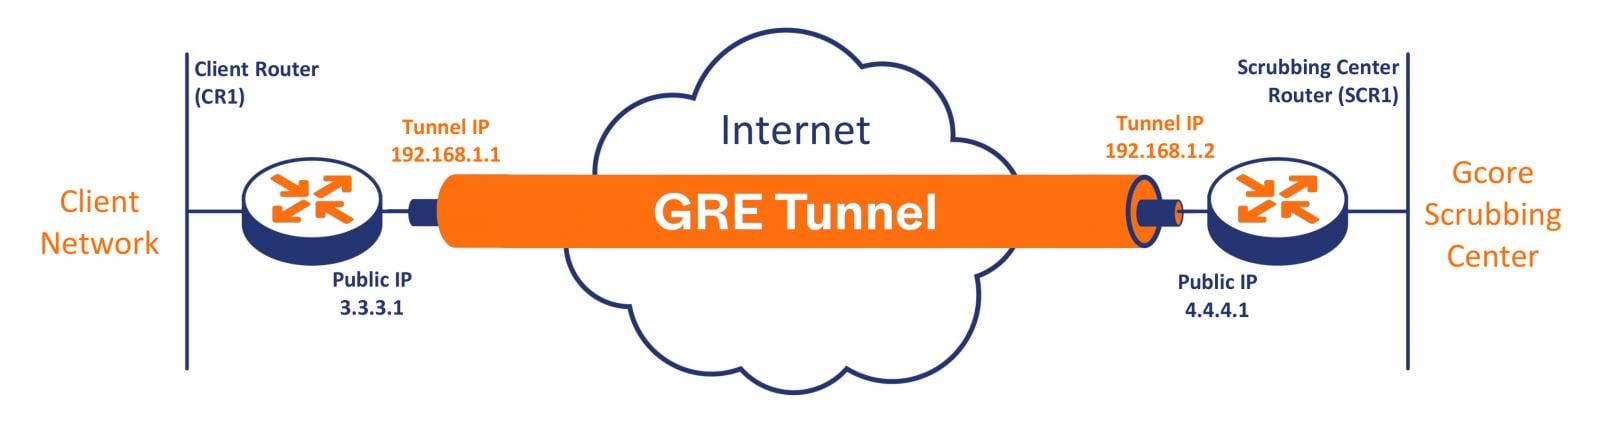 GRE tunnel between the Cisco router and the cleaning center